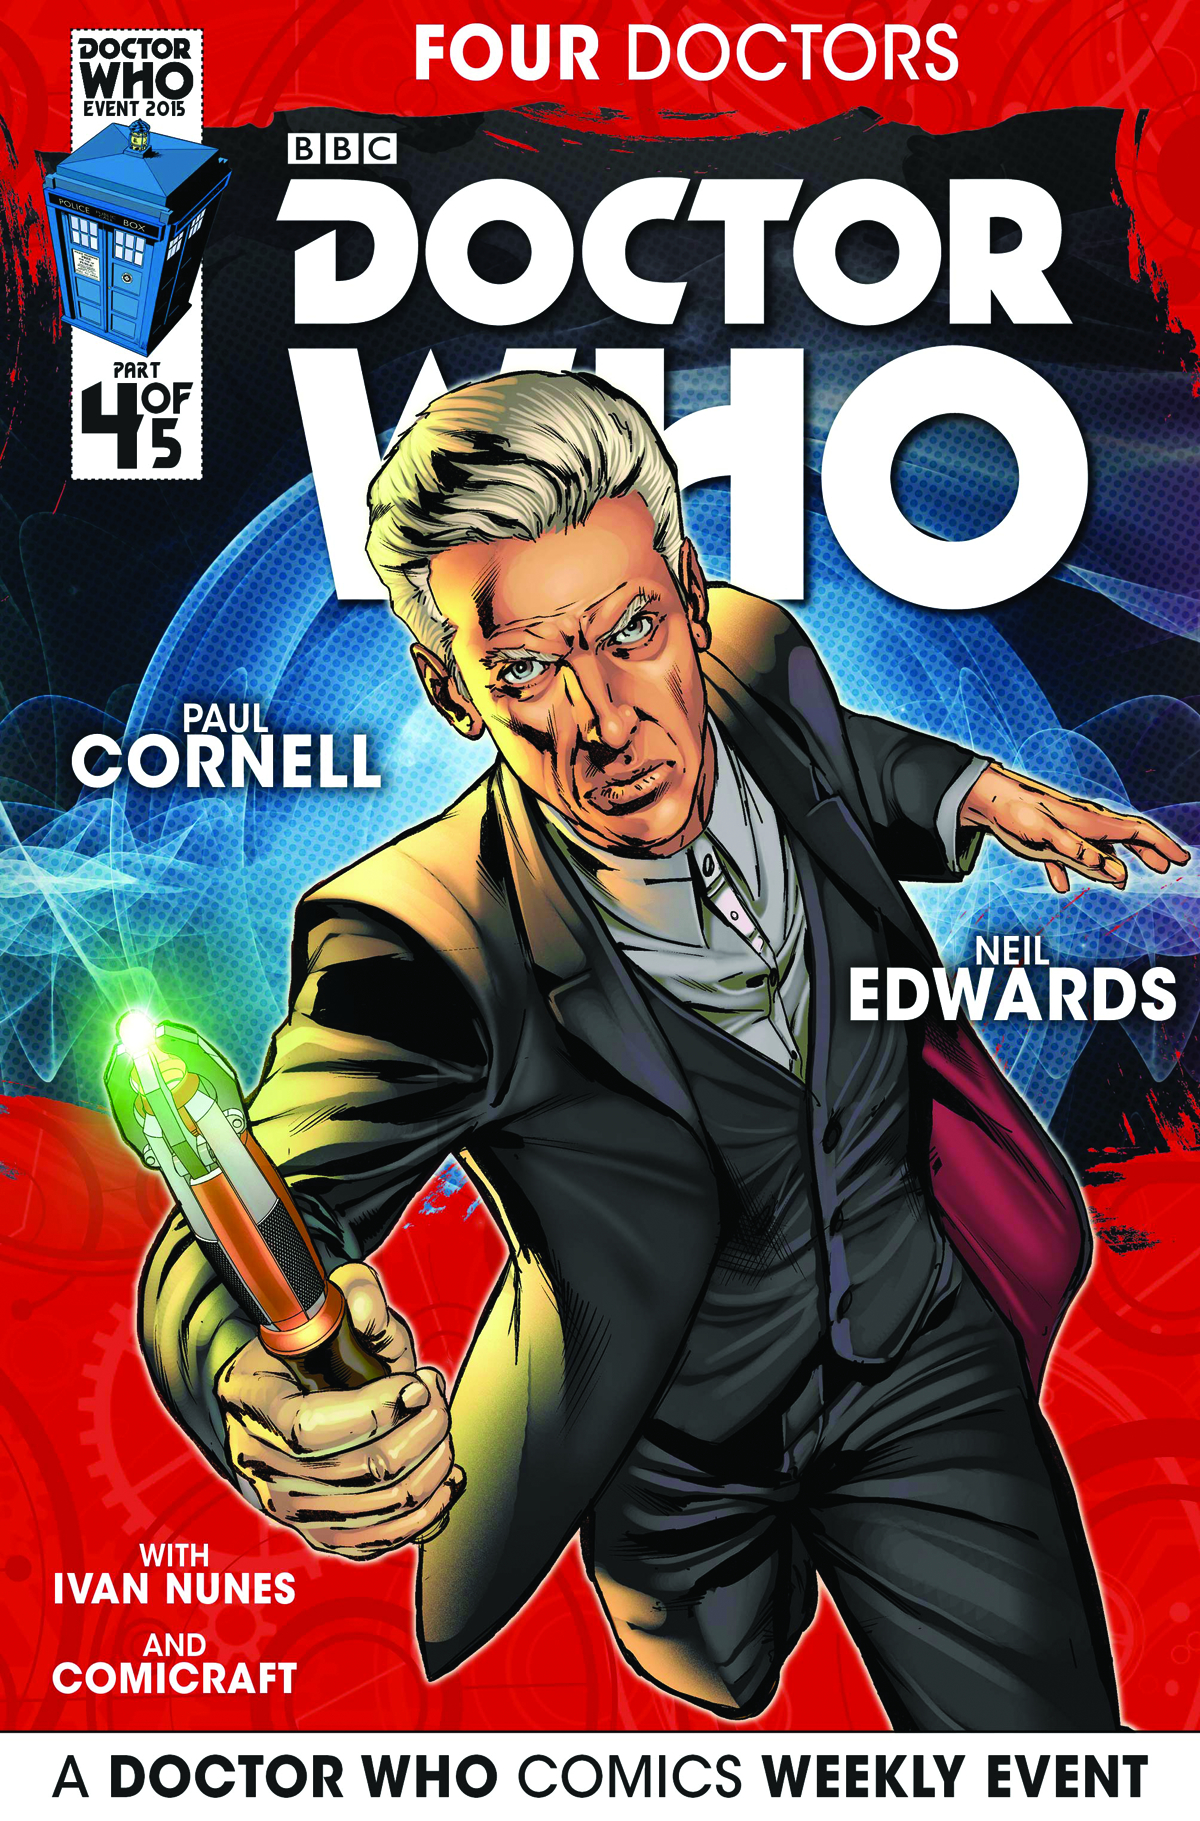 DOCTOR WHO 2015 FOUR DOCTORS #4 (OF 5) REG EDWARDS